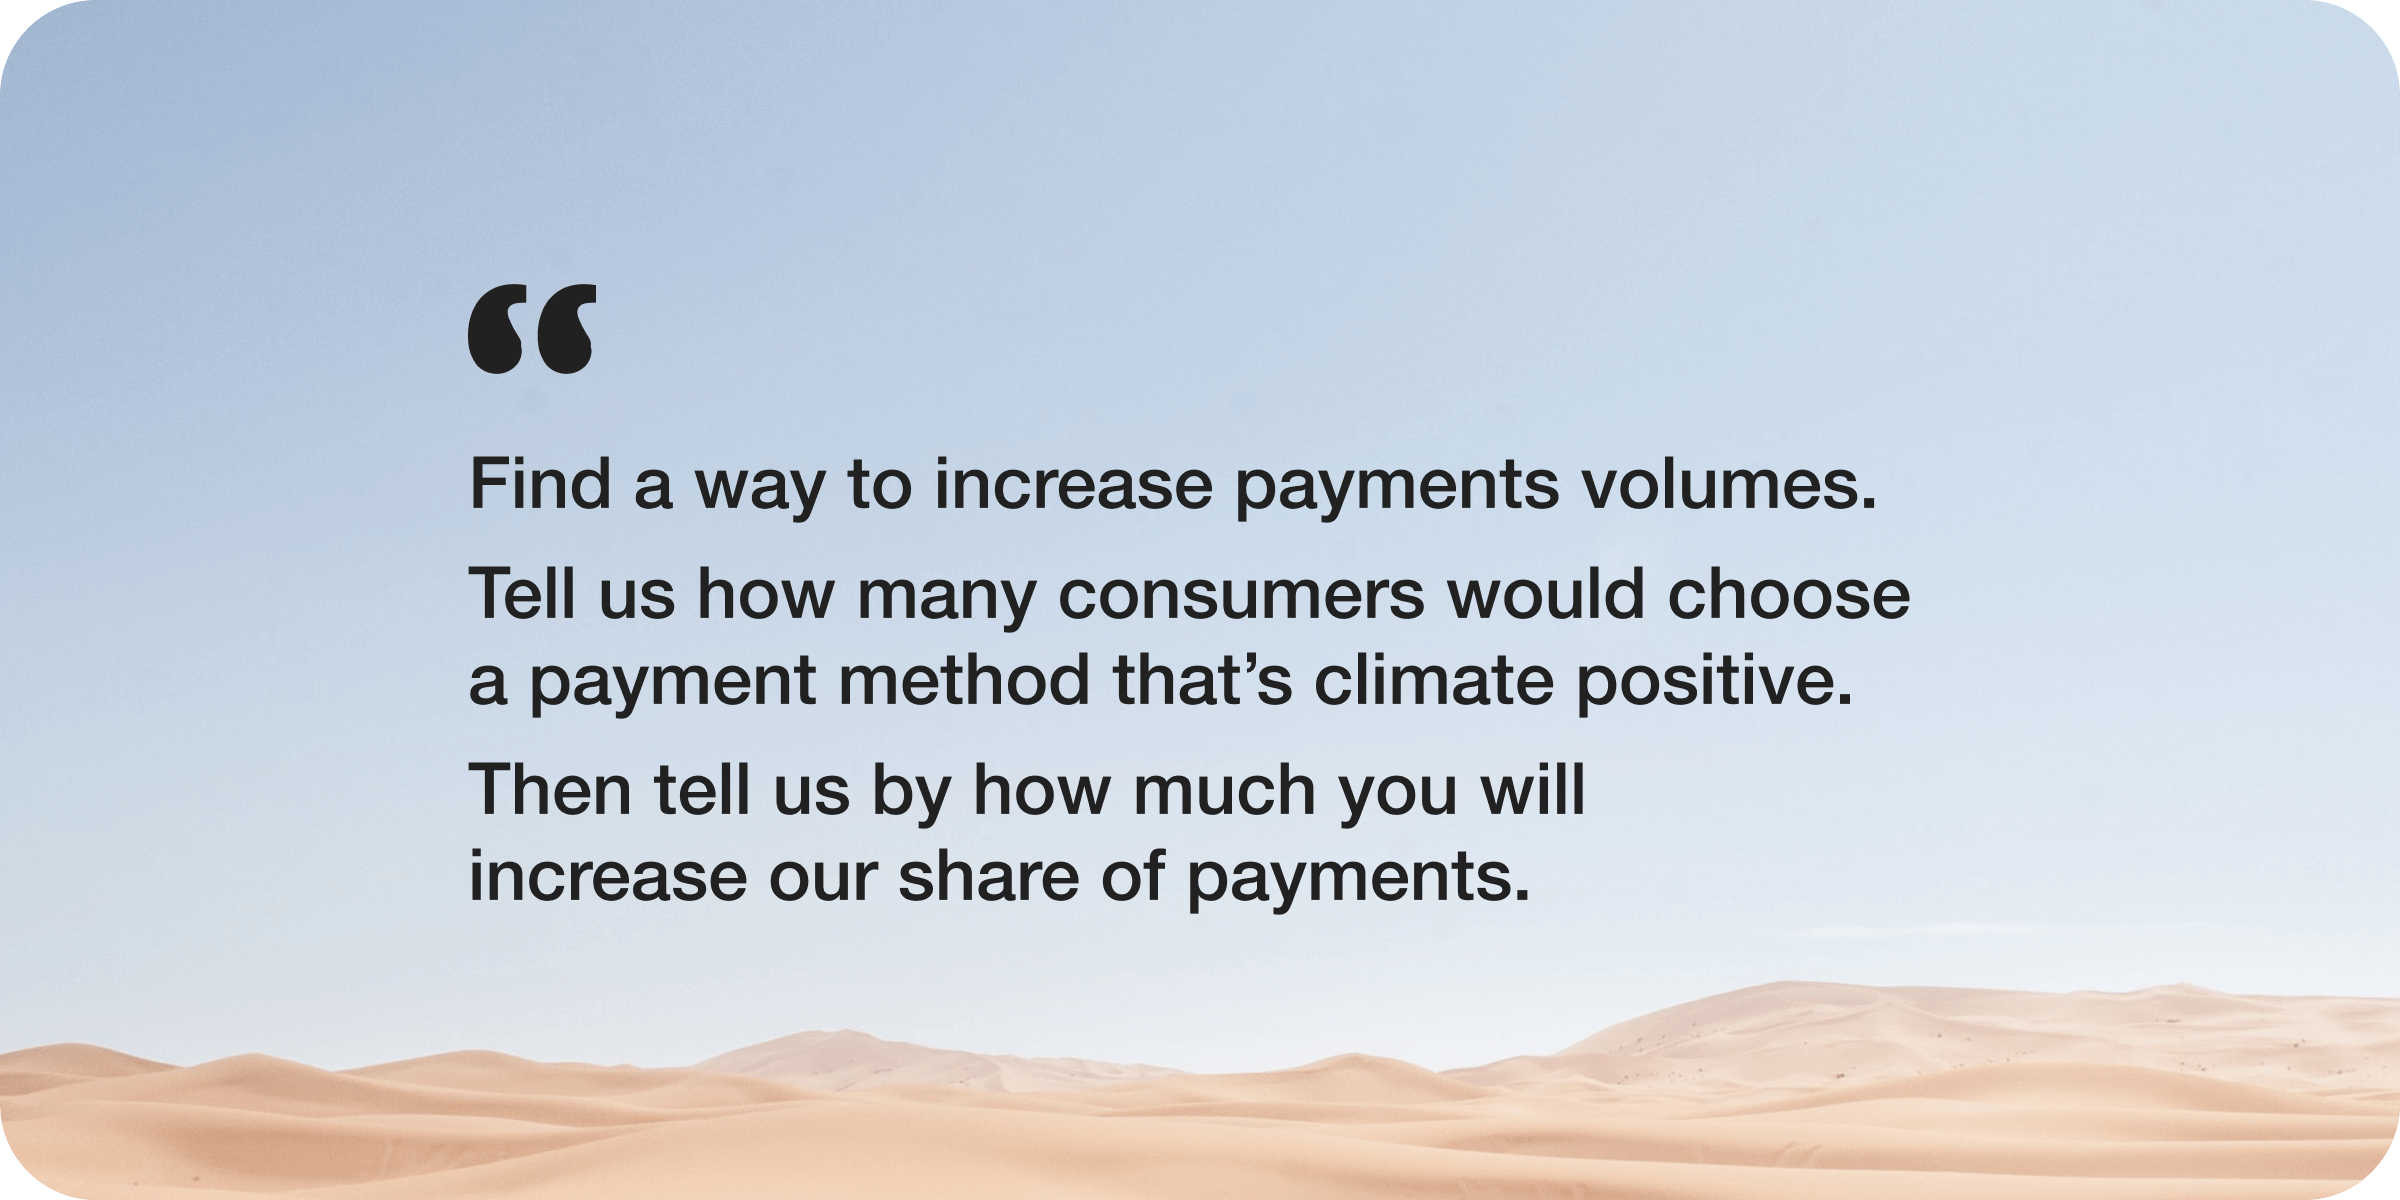 Find a way to increase payments volumes. Tell us how many consumers would choose a payment method that's climate positive. Then tell us by how much you'll increase our share of payments.